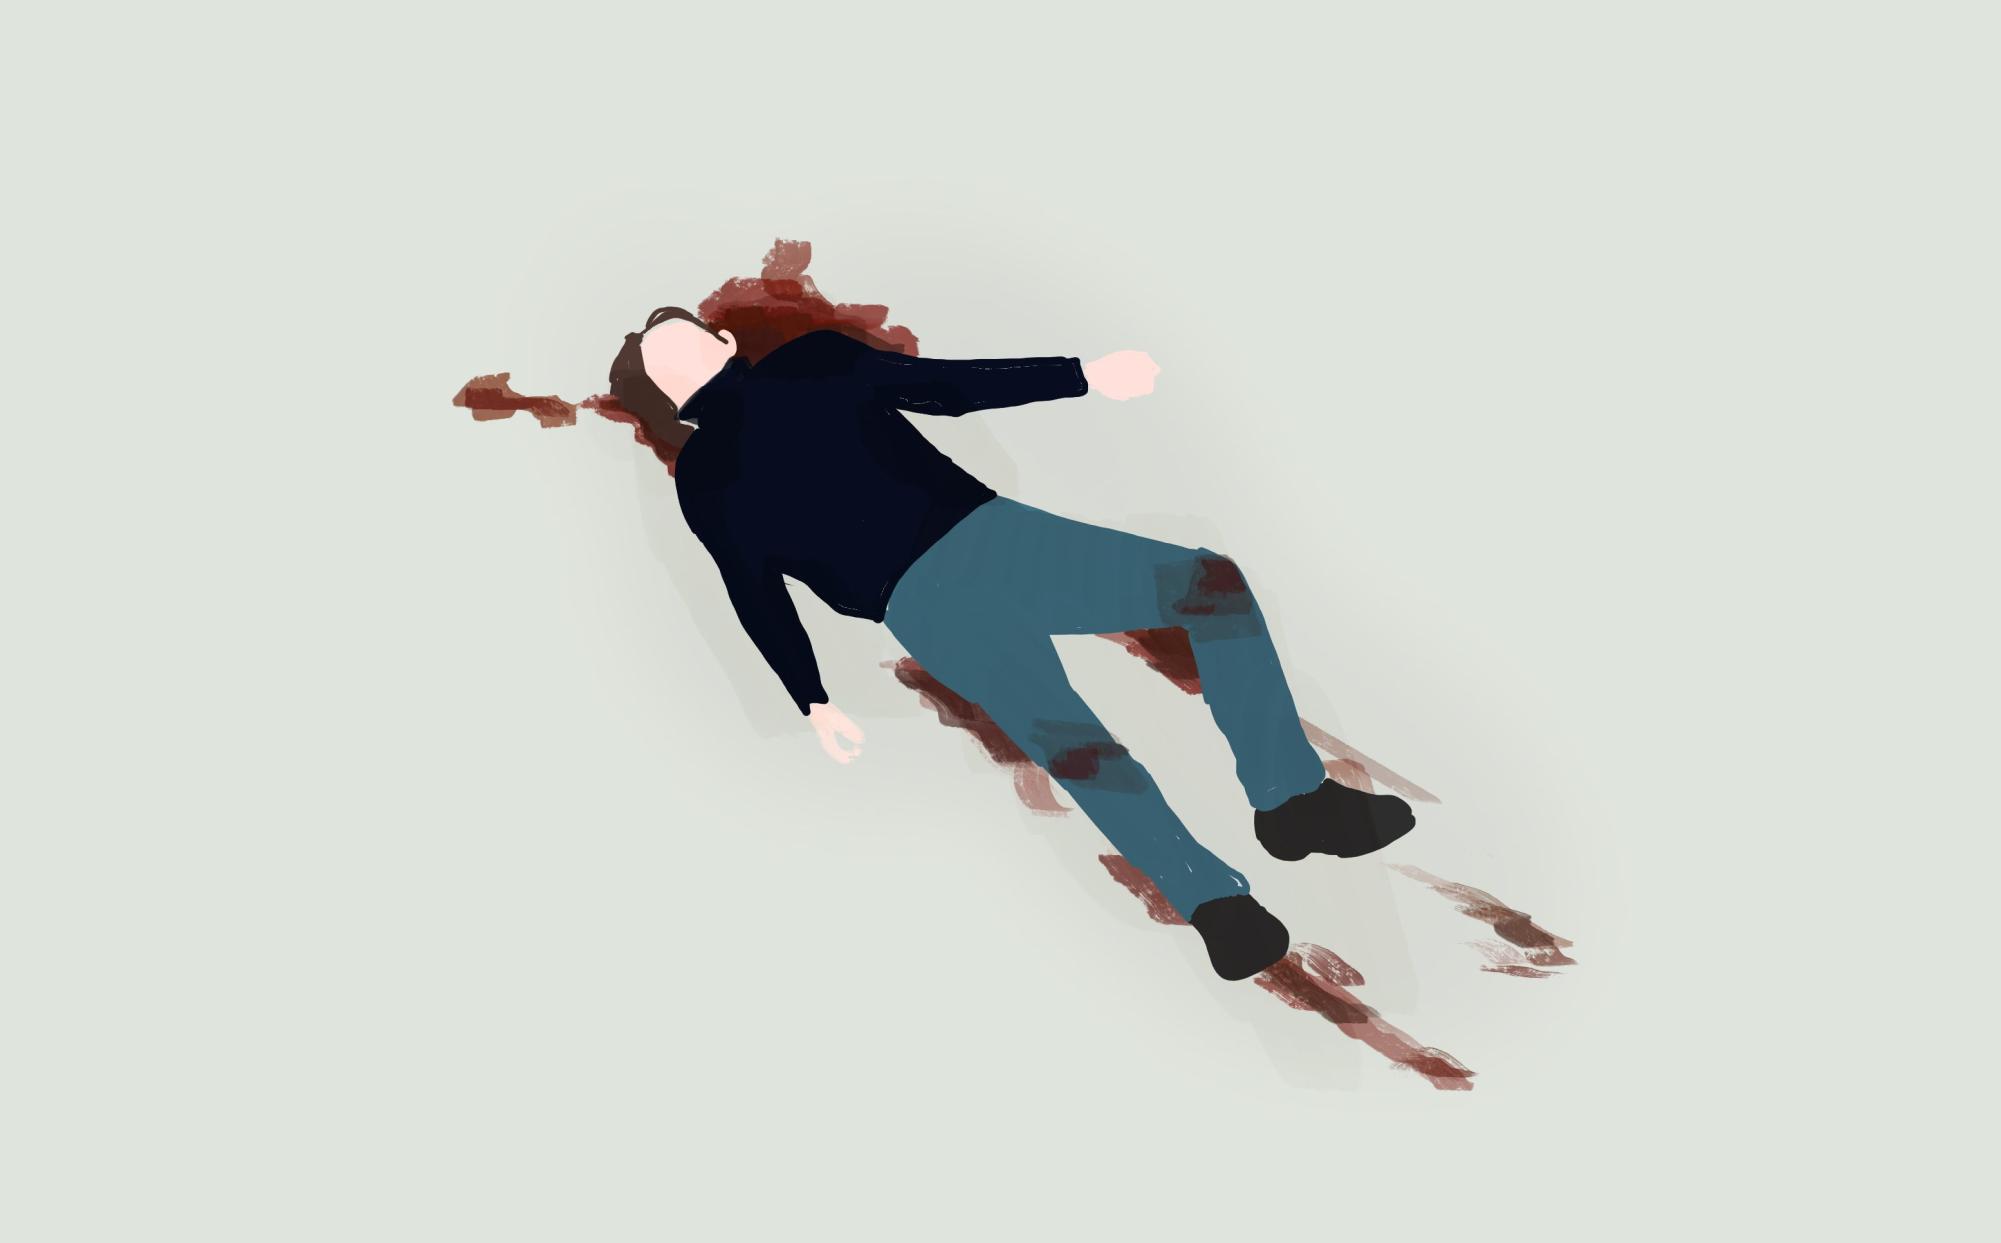 Dramatic pose reference of figure caught in a falling collapse - AdorkaStock